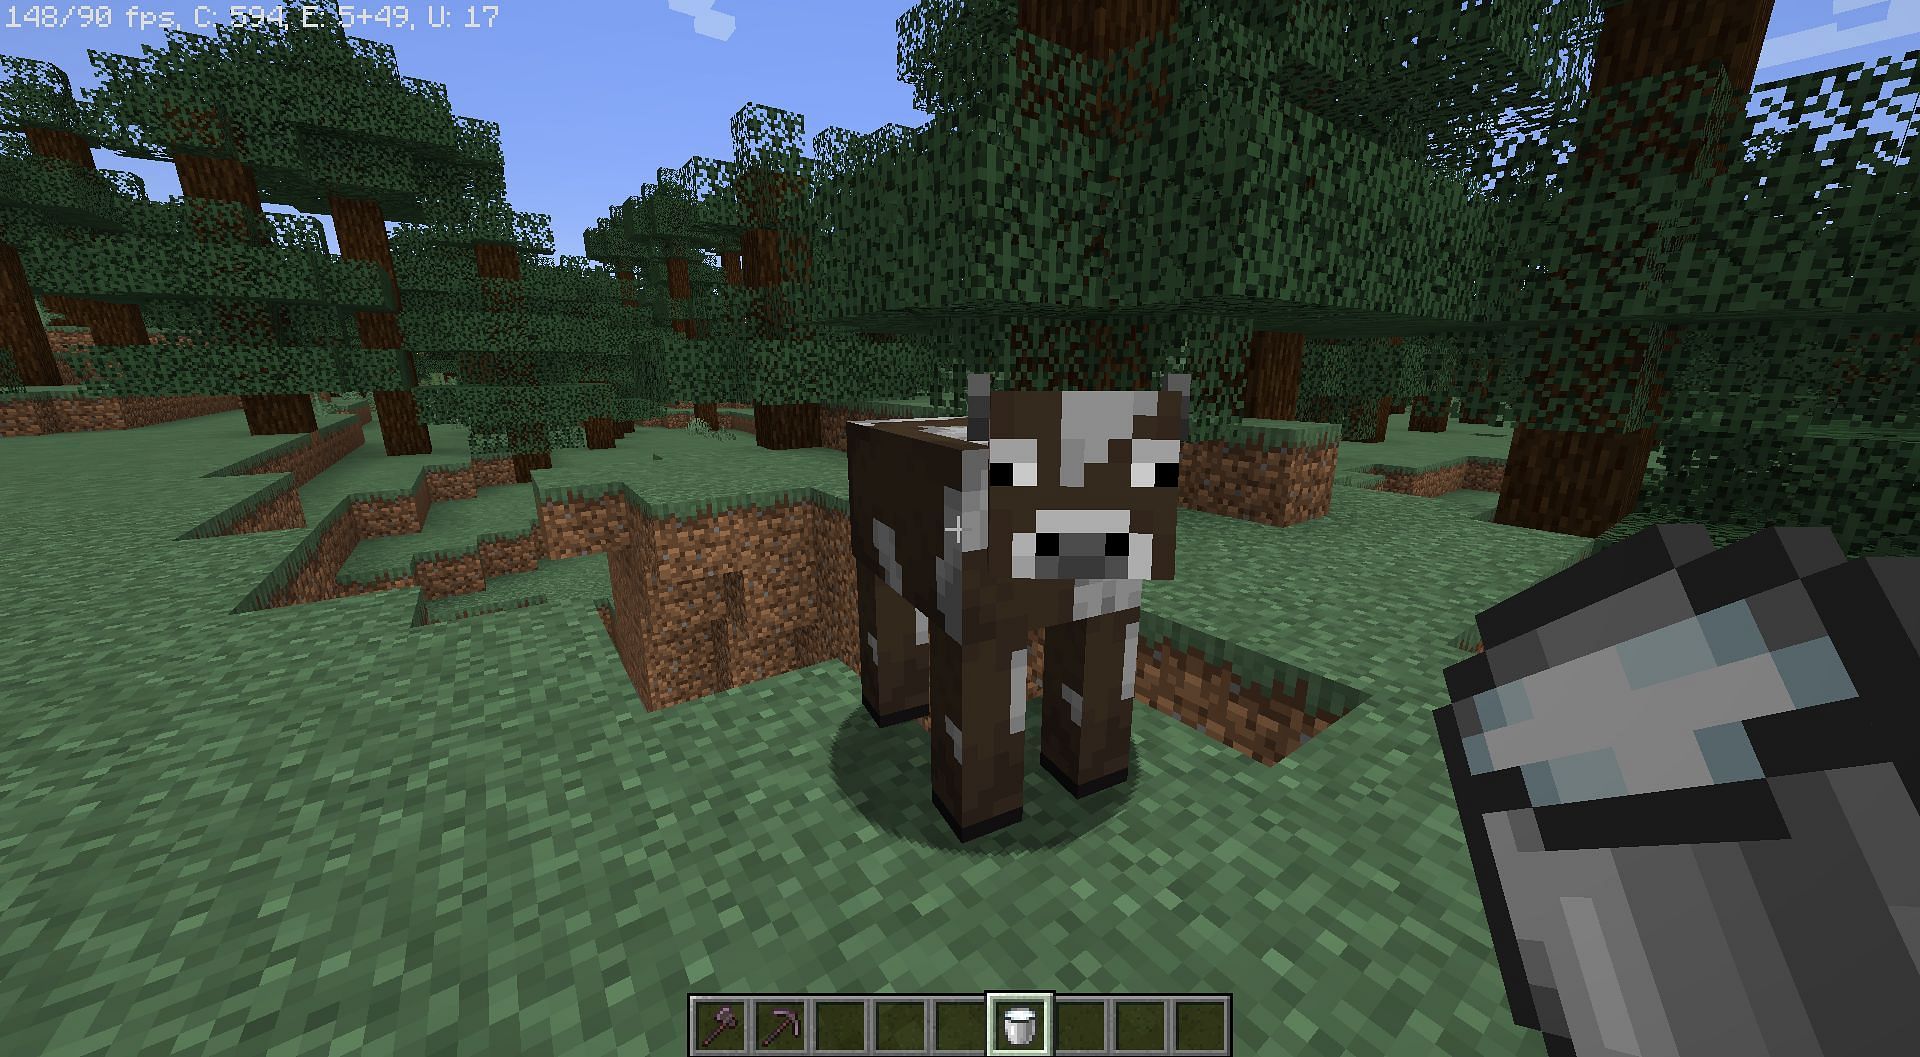 Drink milk after getting it from a cow (Image via Mojang)